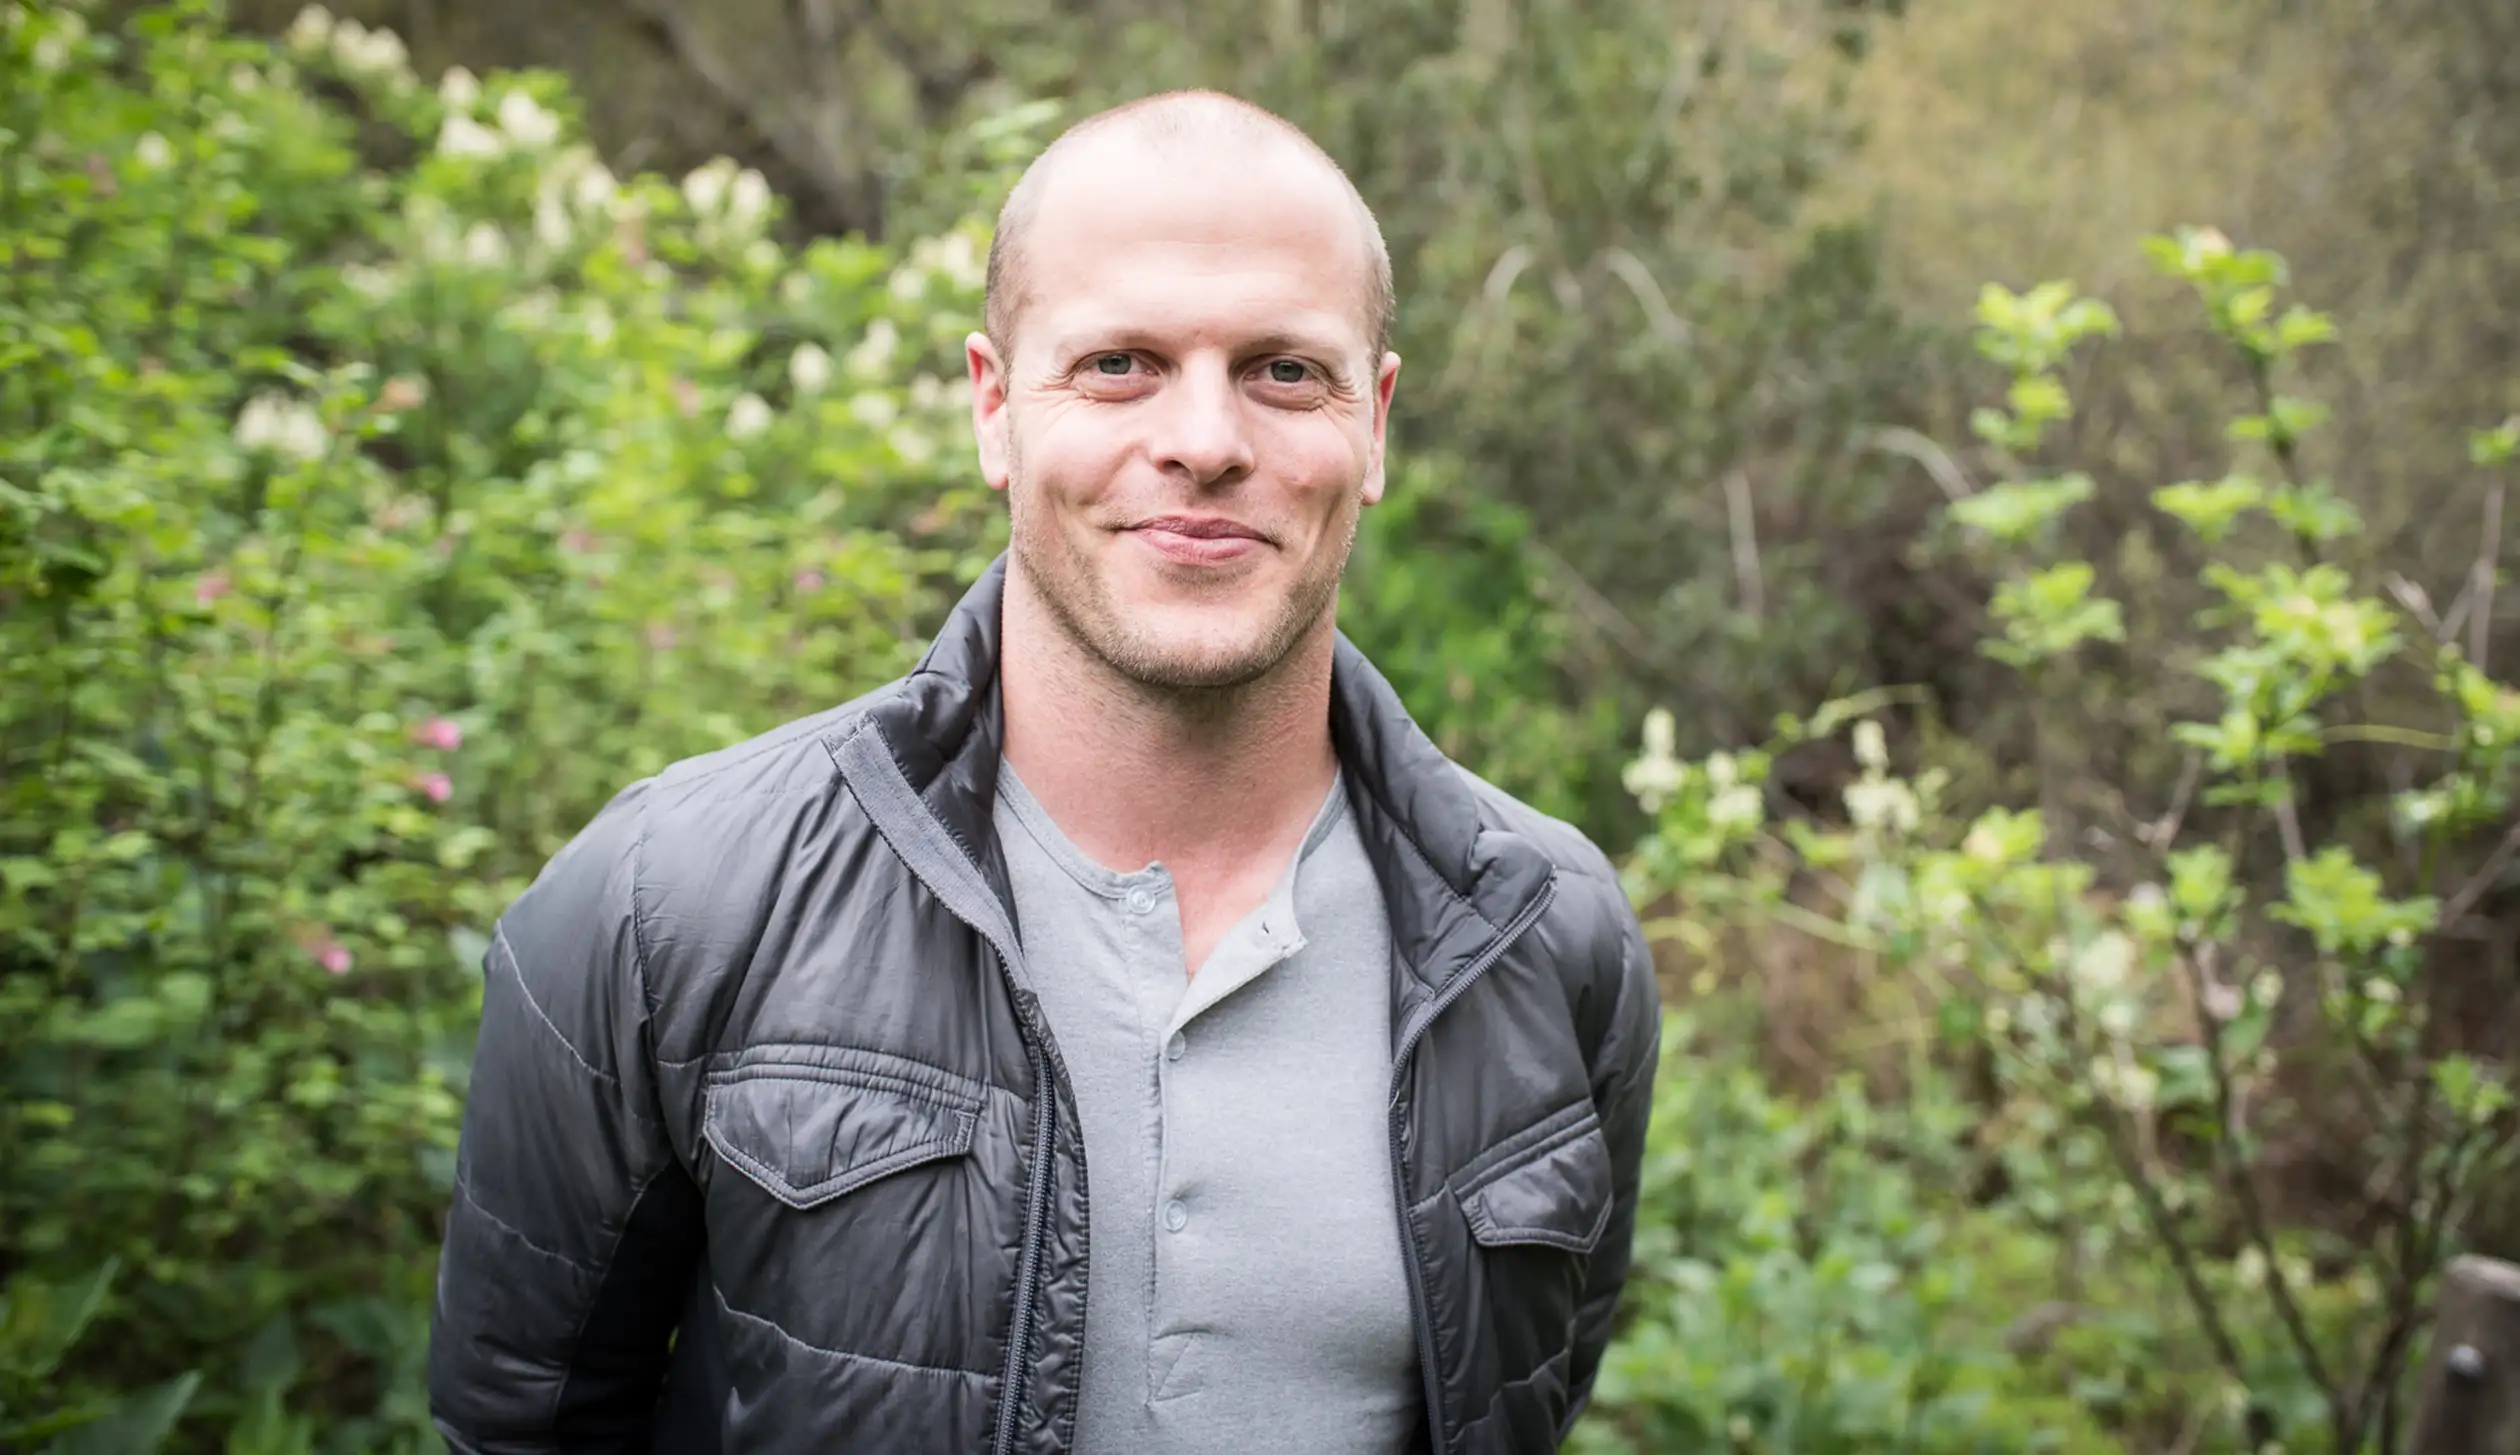 We're Doing A Live Interview With Tim Ferriss… Wanna Ask A Question?